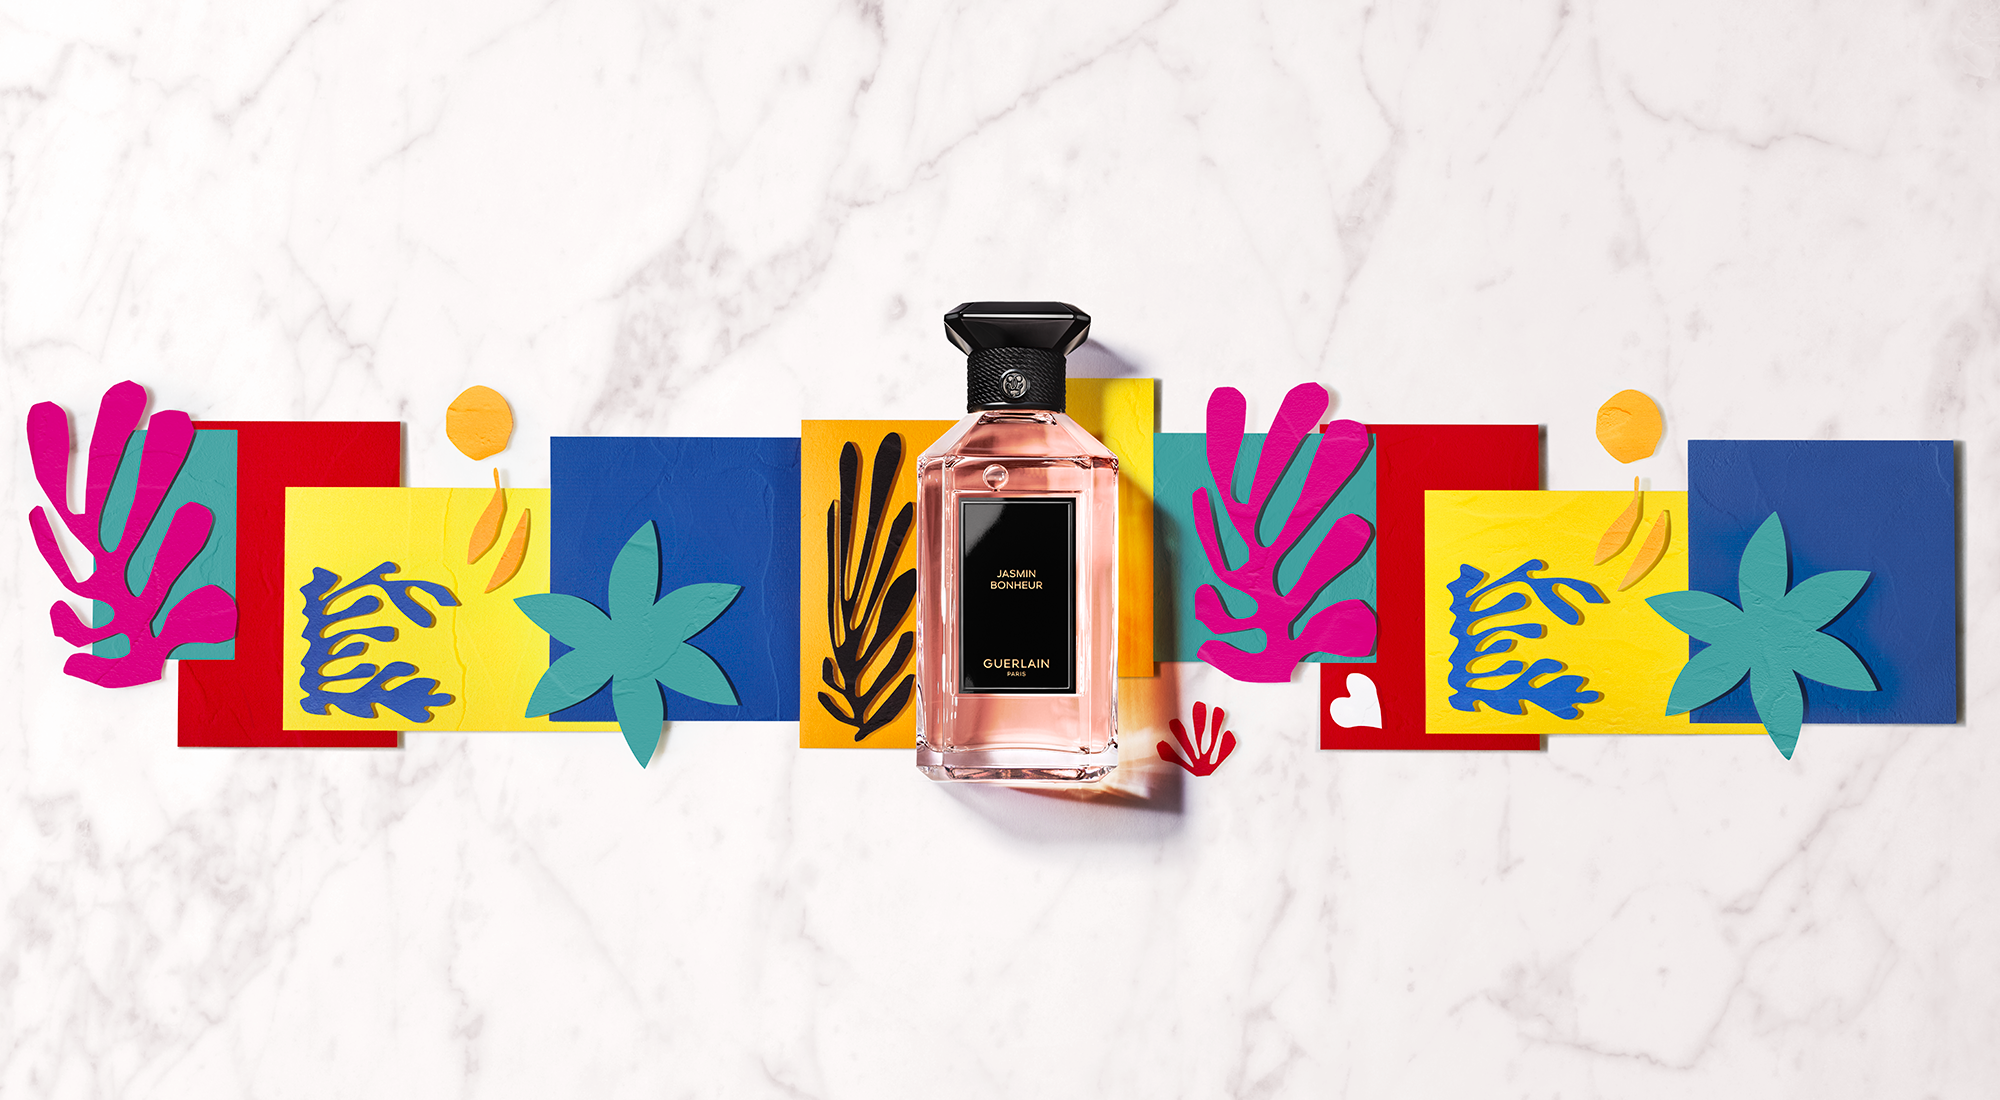 “The Art Of Happiness” The Guerlain x Maison Matisse Artistic Collaboration